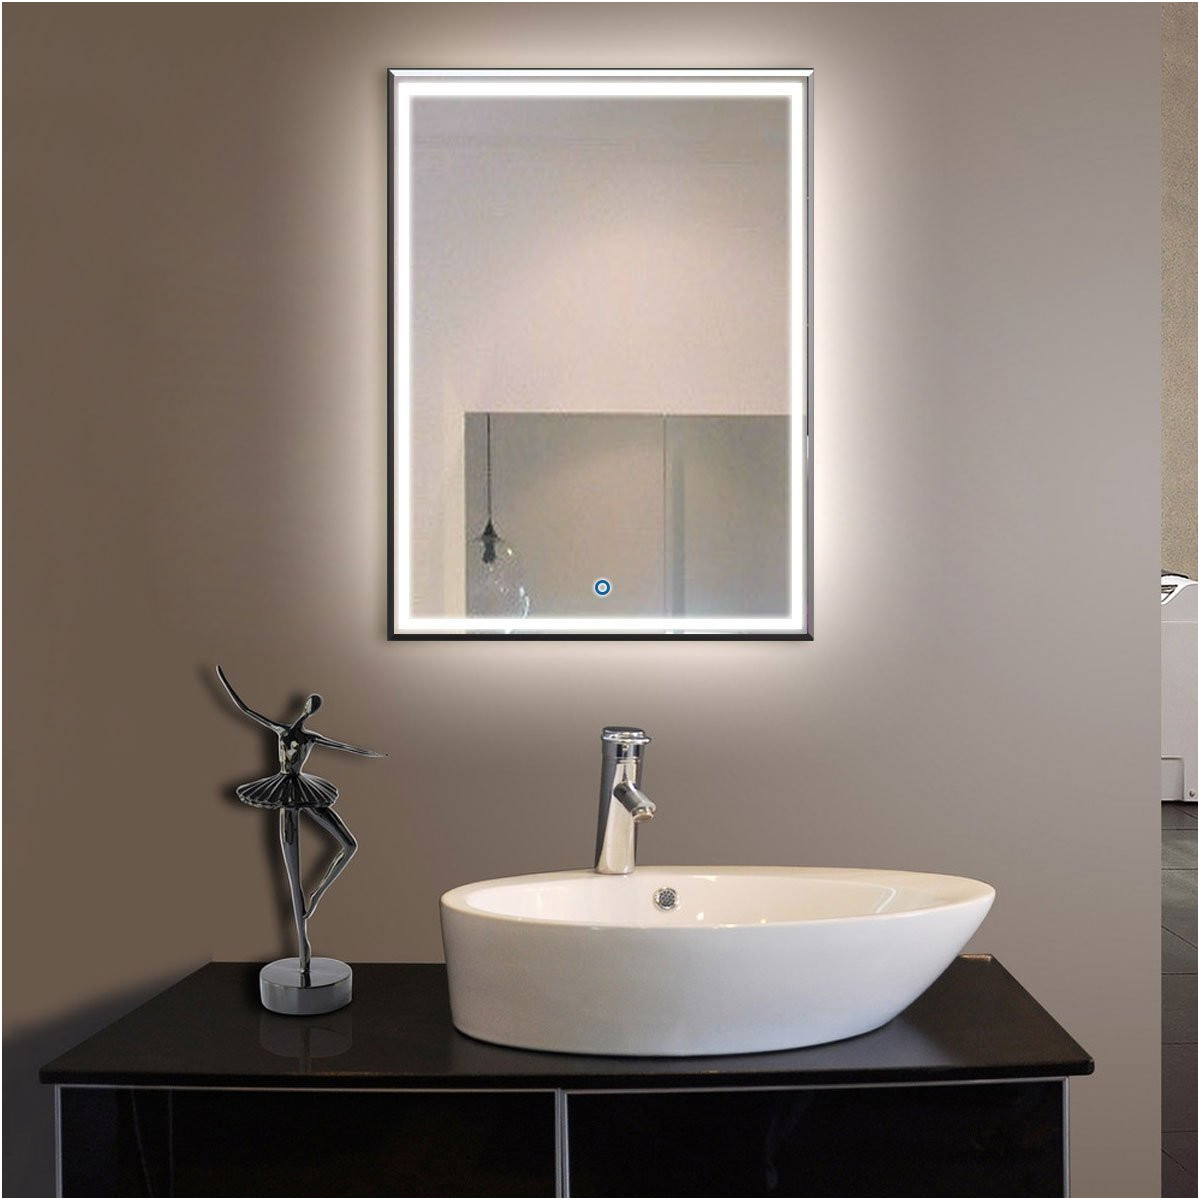 Inspirational Add Frame to Mirrors Bathroom